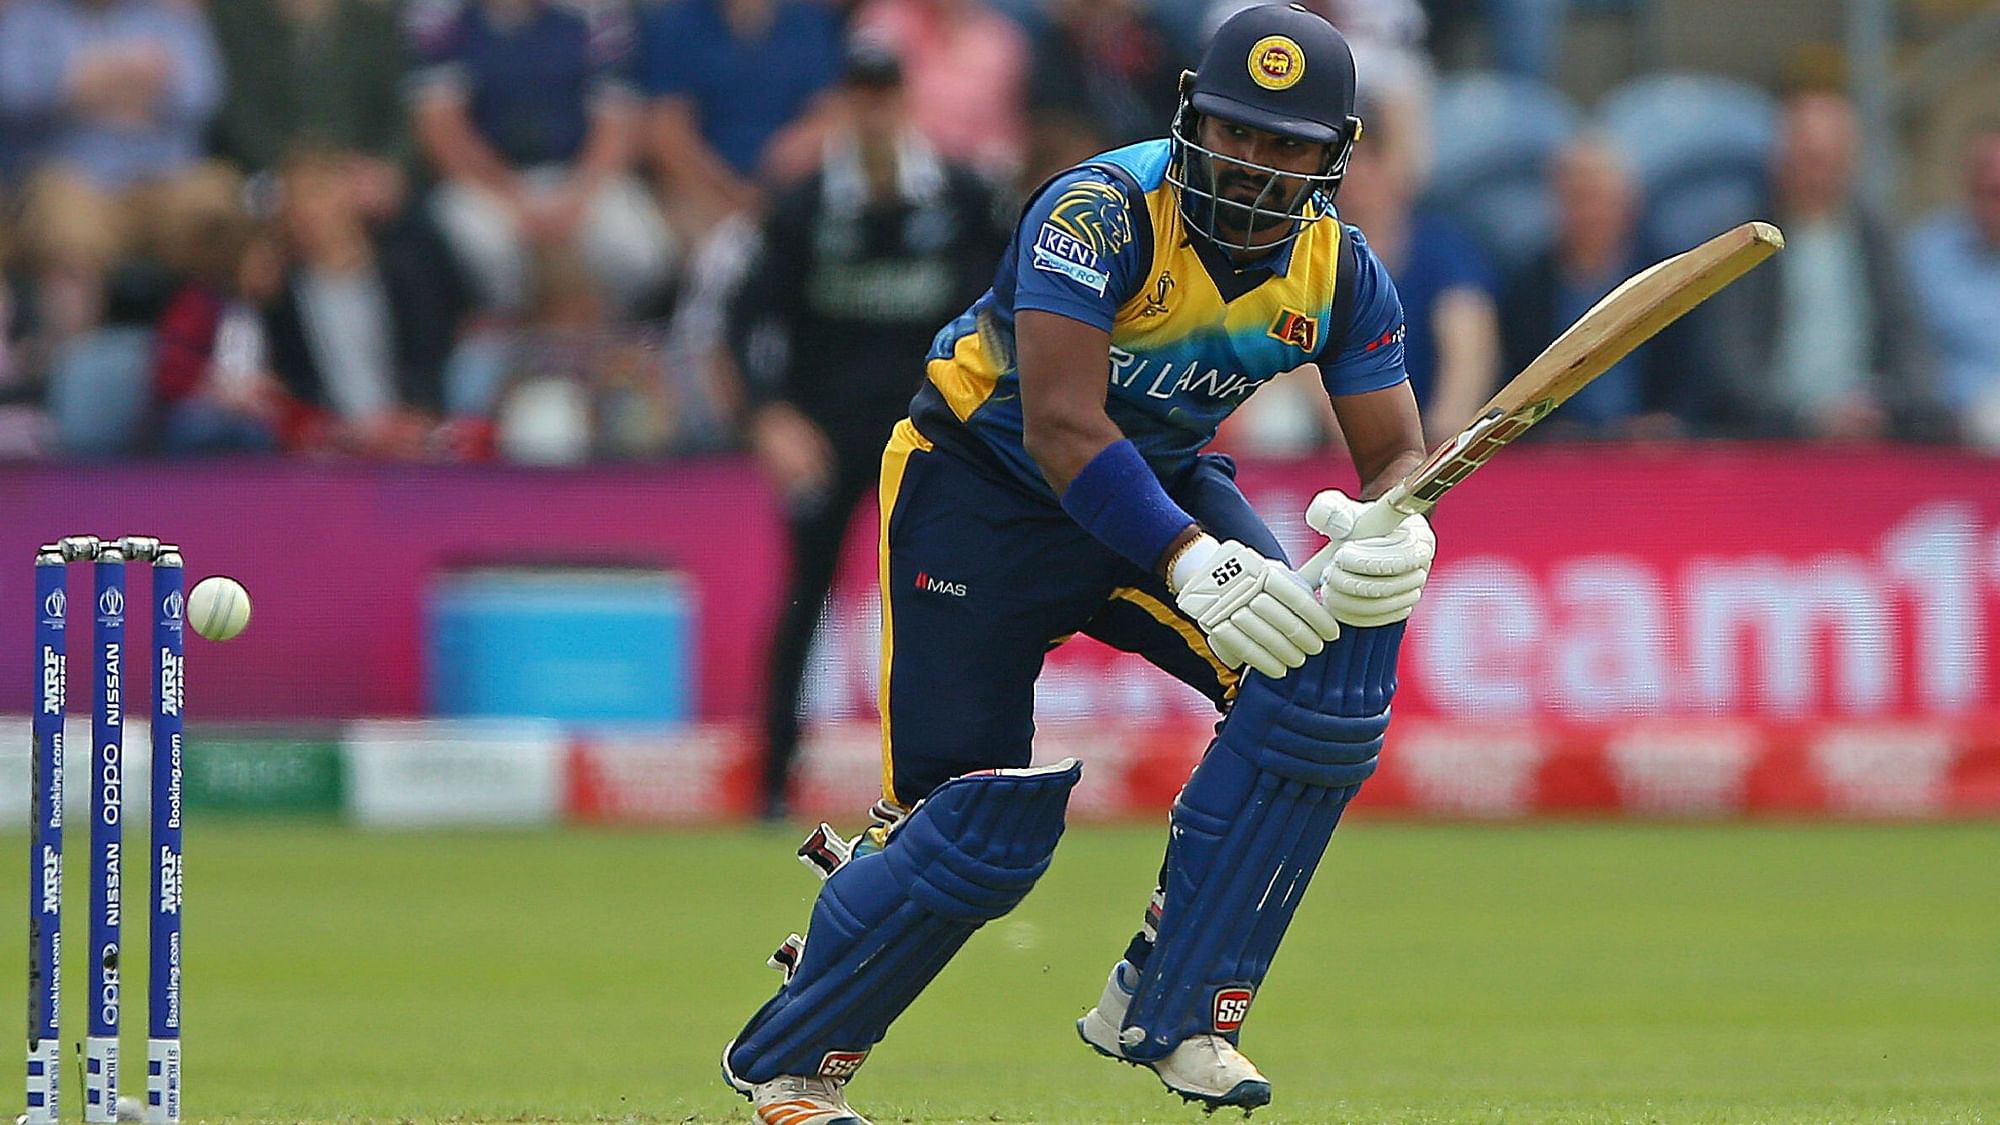 Sri Lankan skipper Dimuth Karunaratne scored an unbeaten 52 off 84 balls as he ran out of partners at the other end.